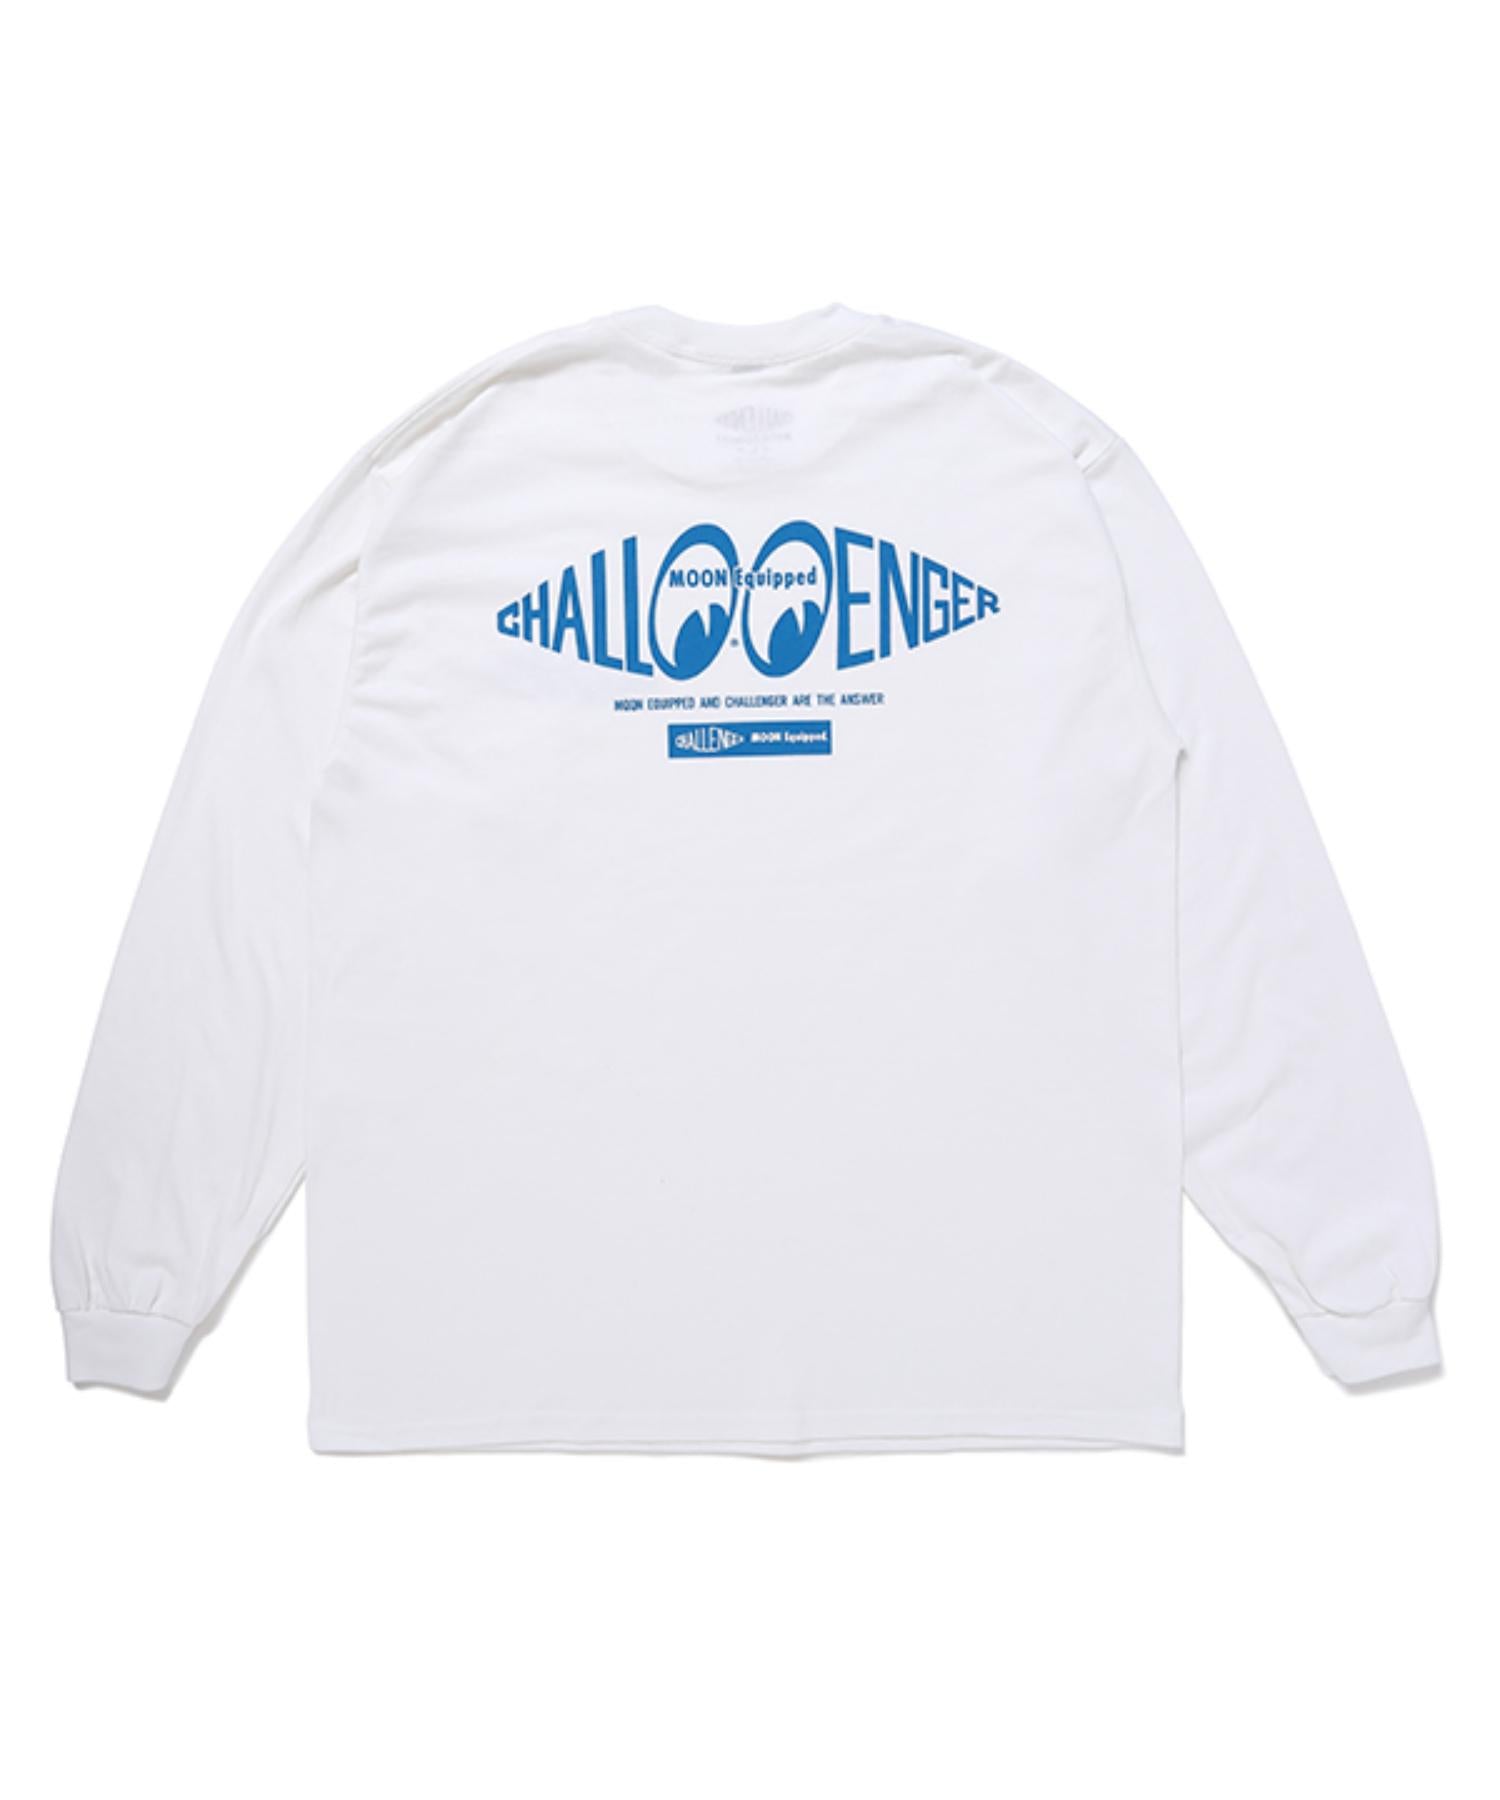 CHALLENGER x MOON Equipped L/S TEE 白 L-